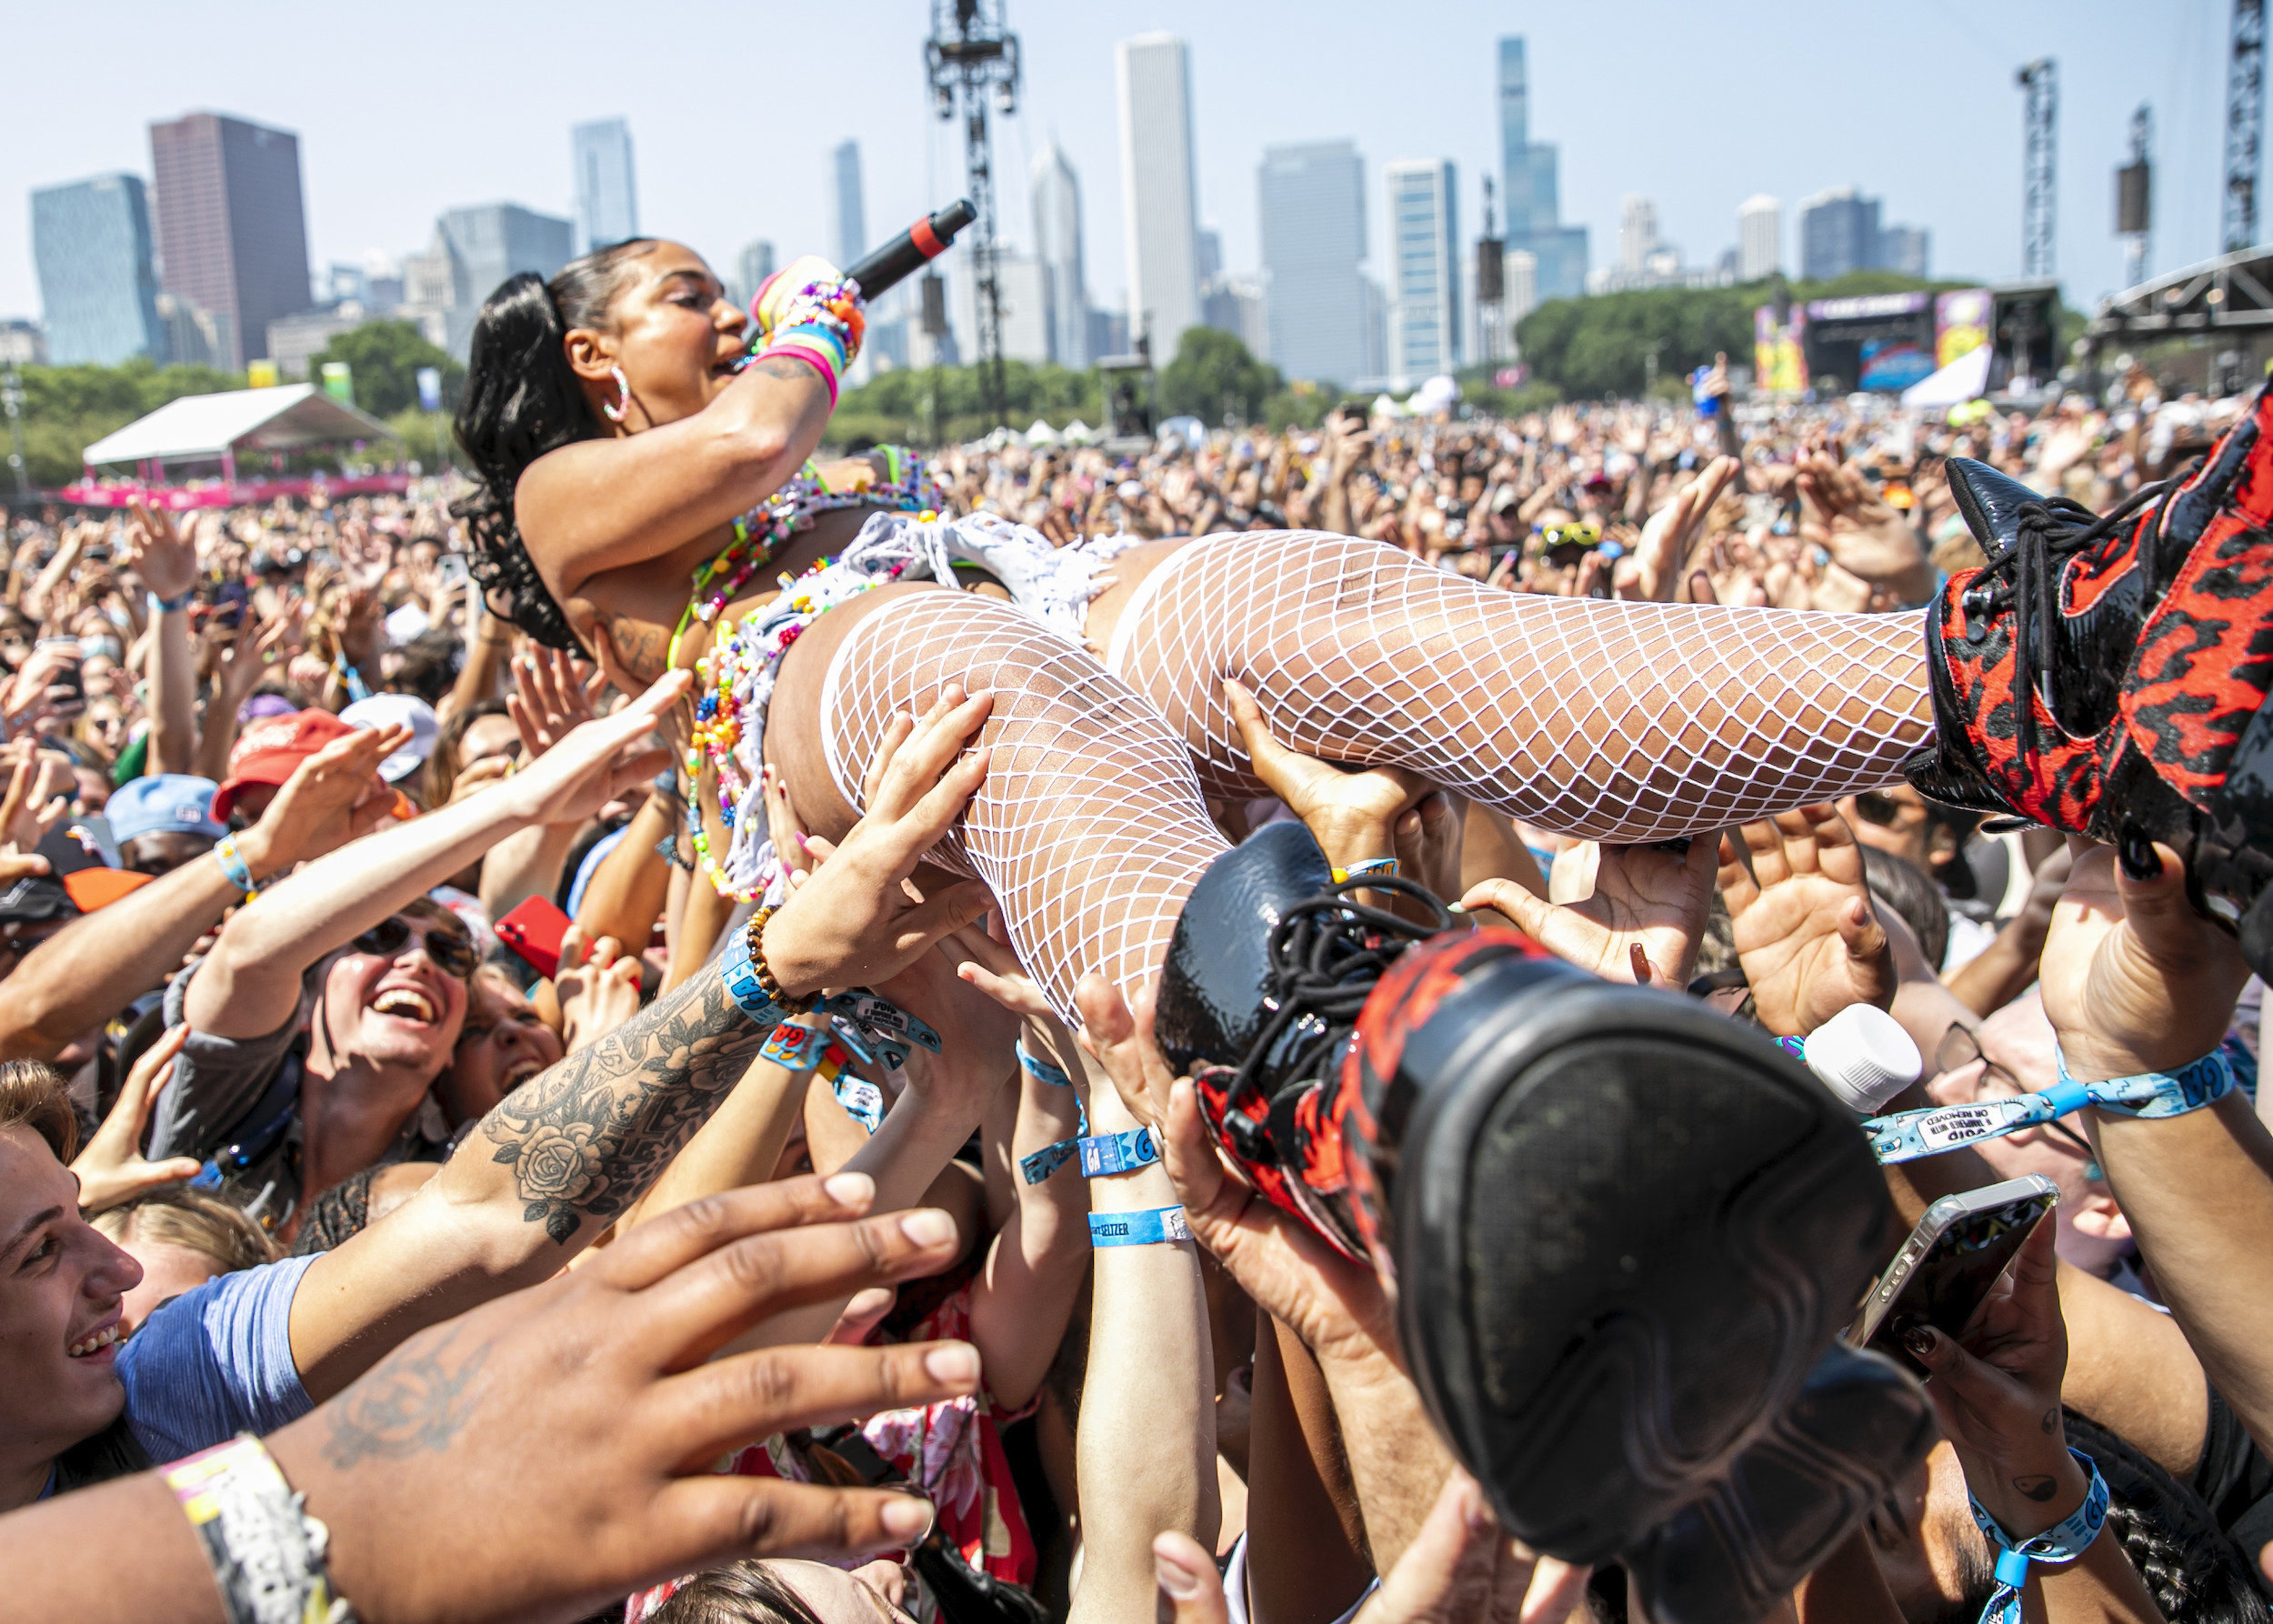 Musician Princess Nokia crowd surfs during her daytime performance at Lollapalooza music festival.